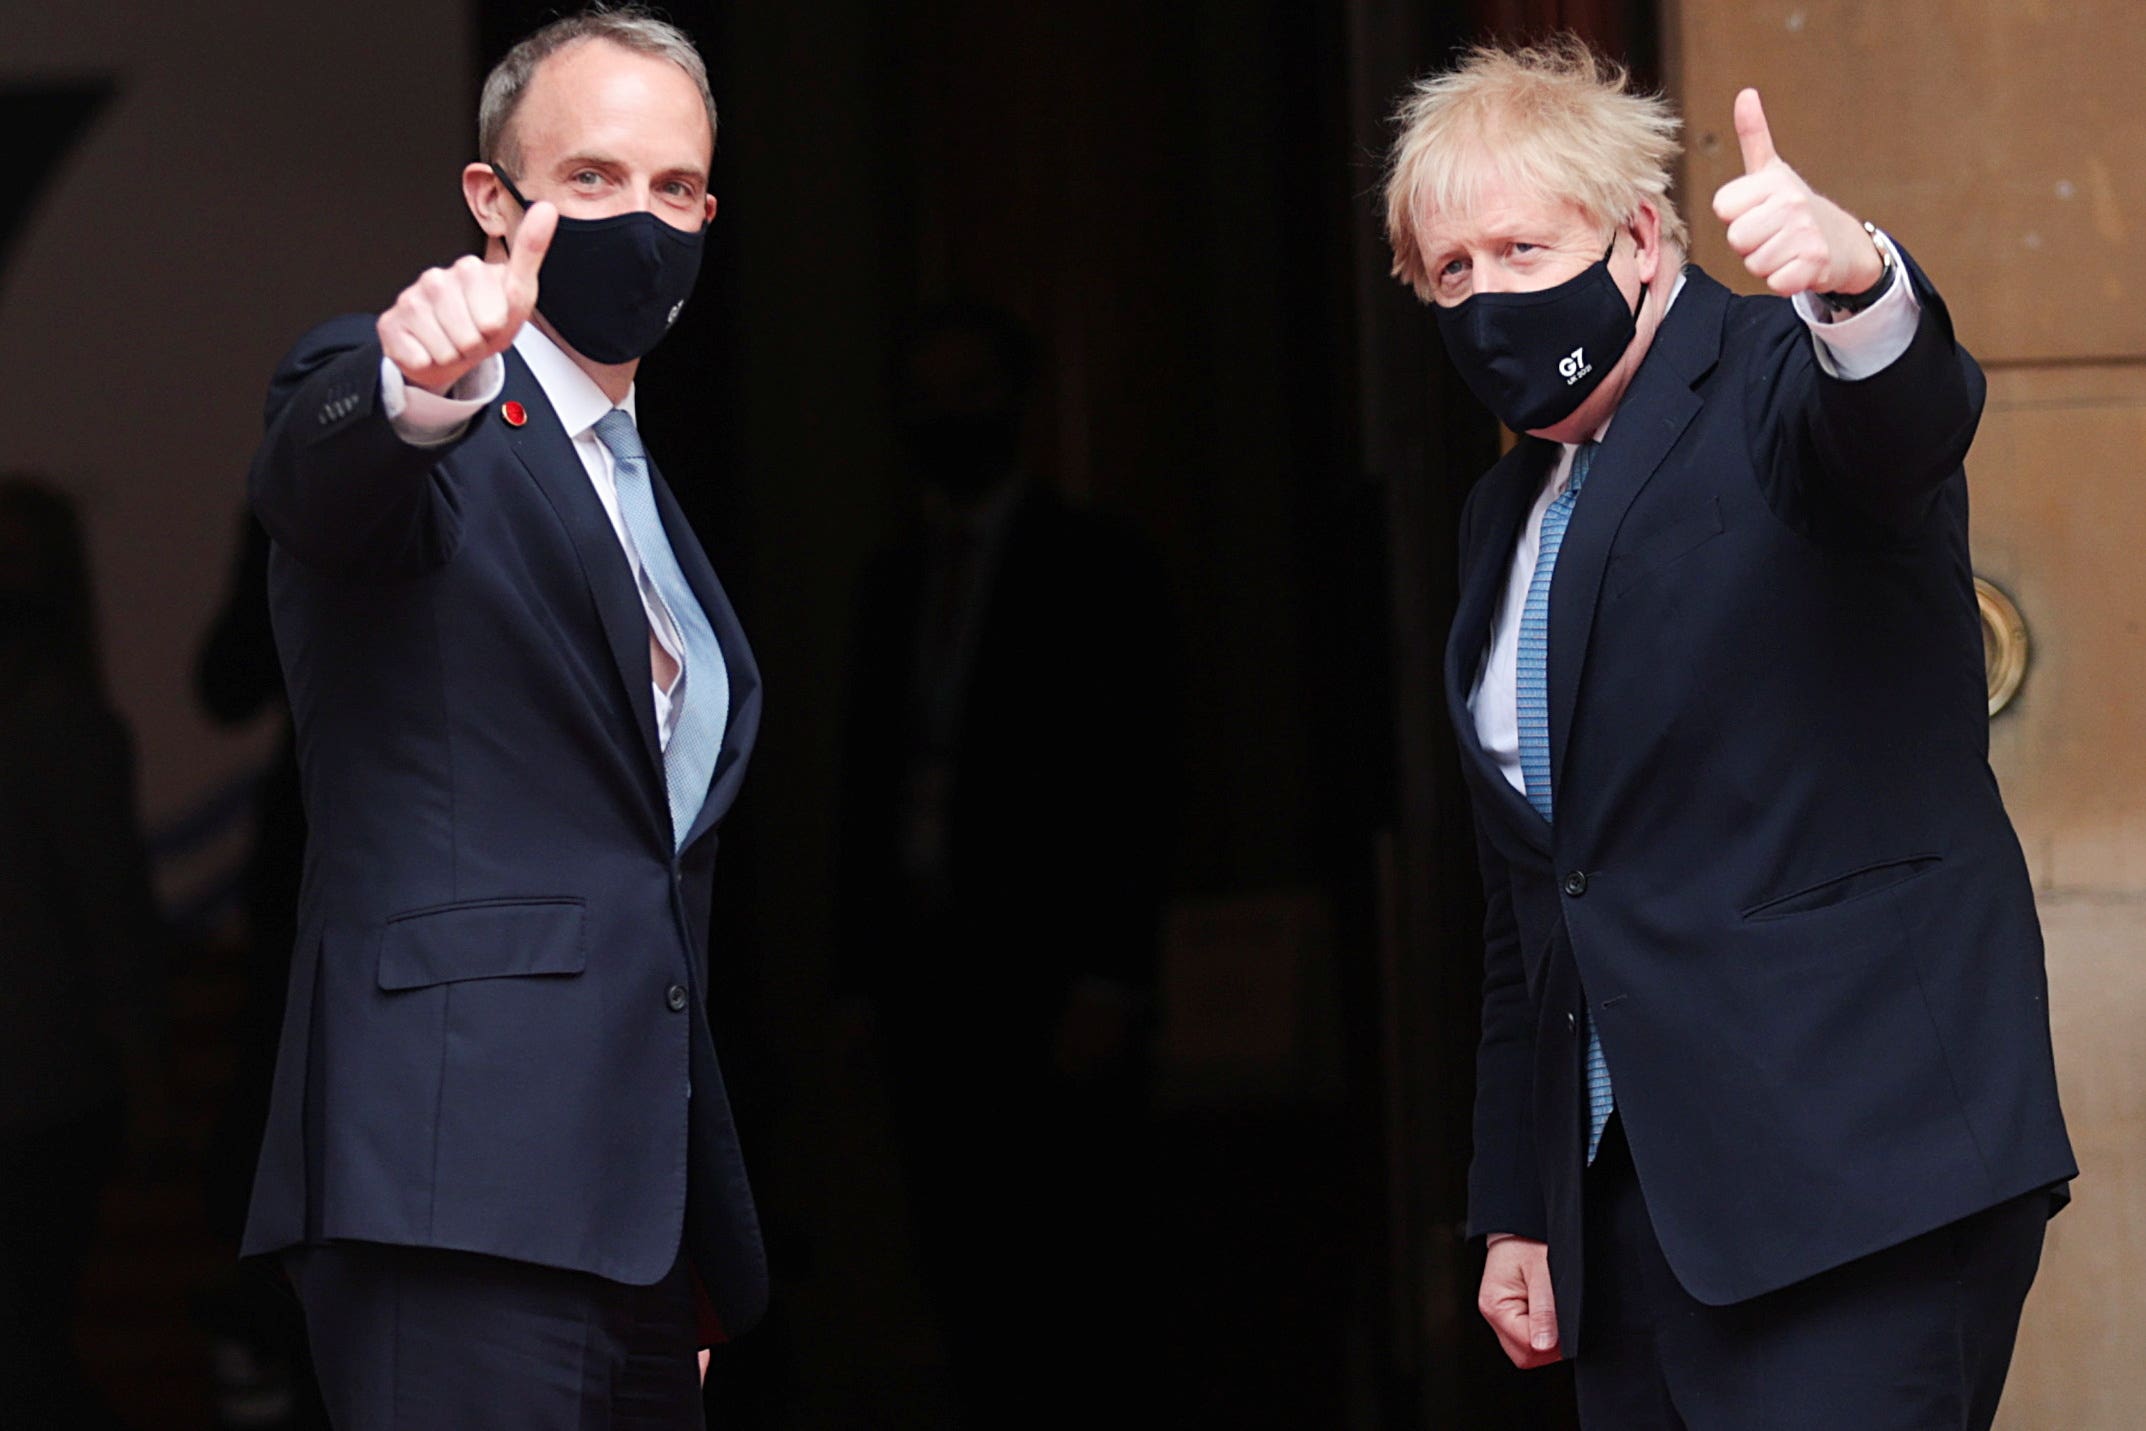 Boris Johnson, pictured with Dominic Raab, during his time in No 10